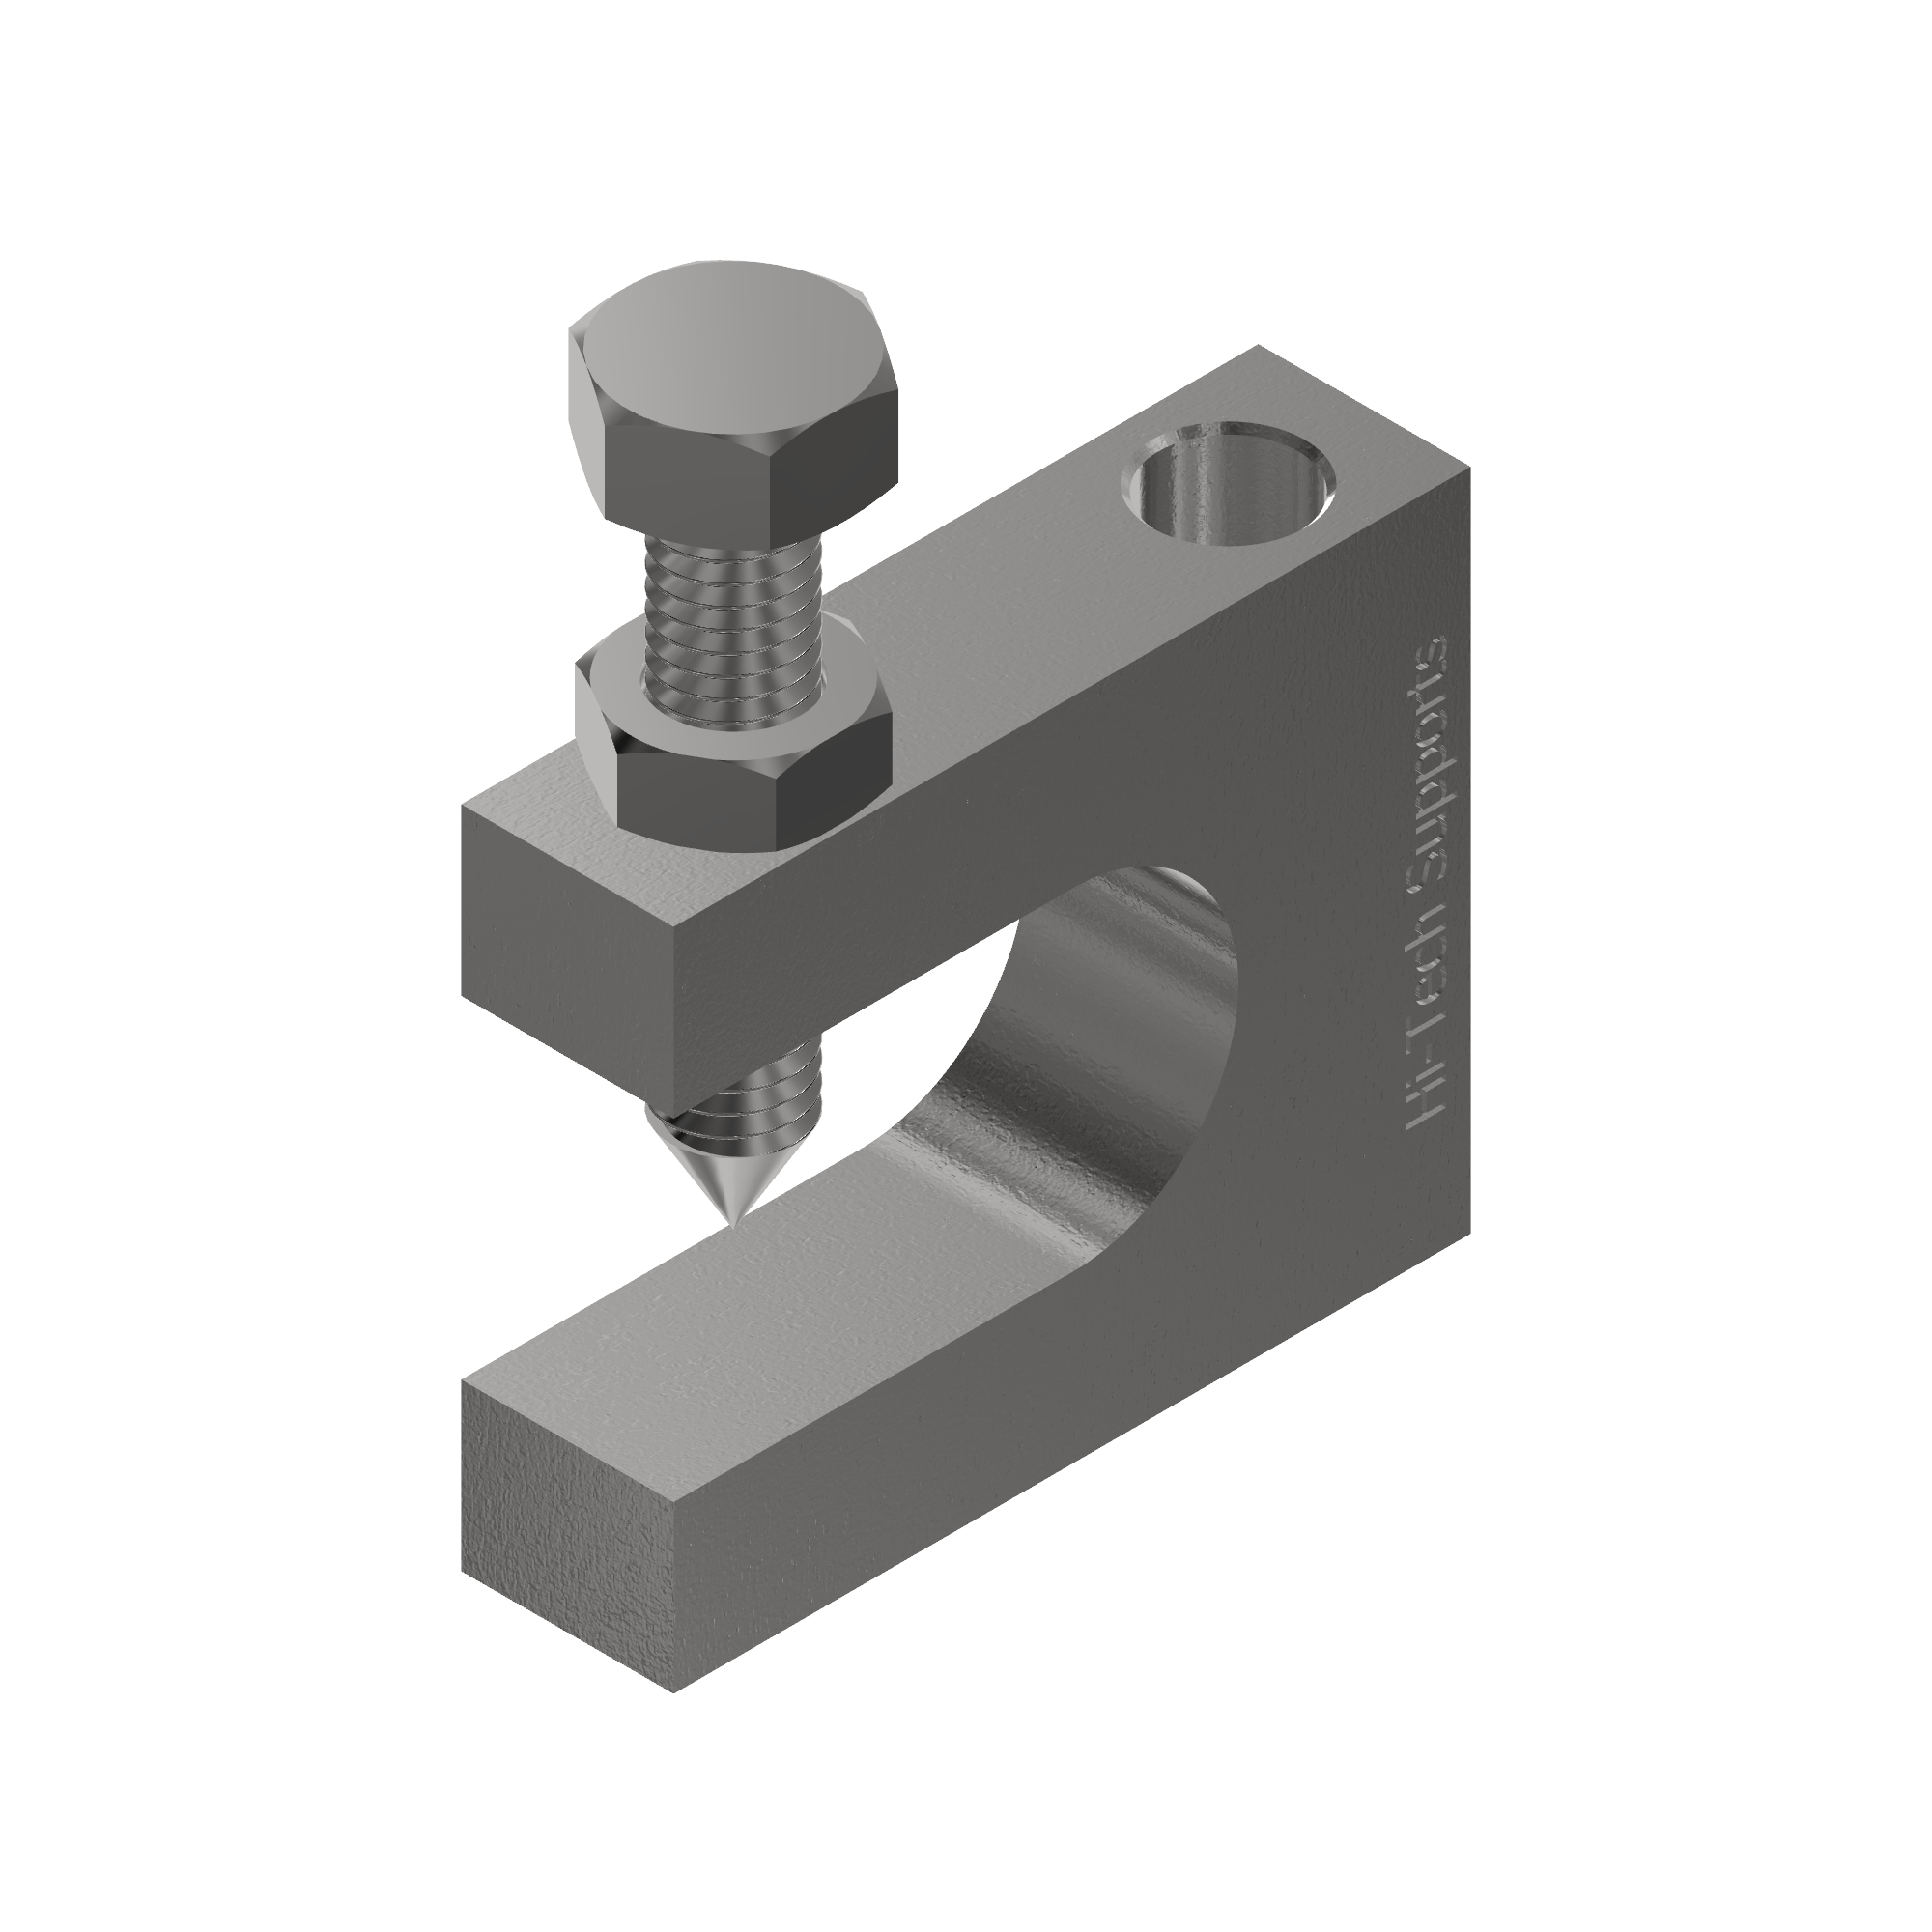 3D Image of G Clamp